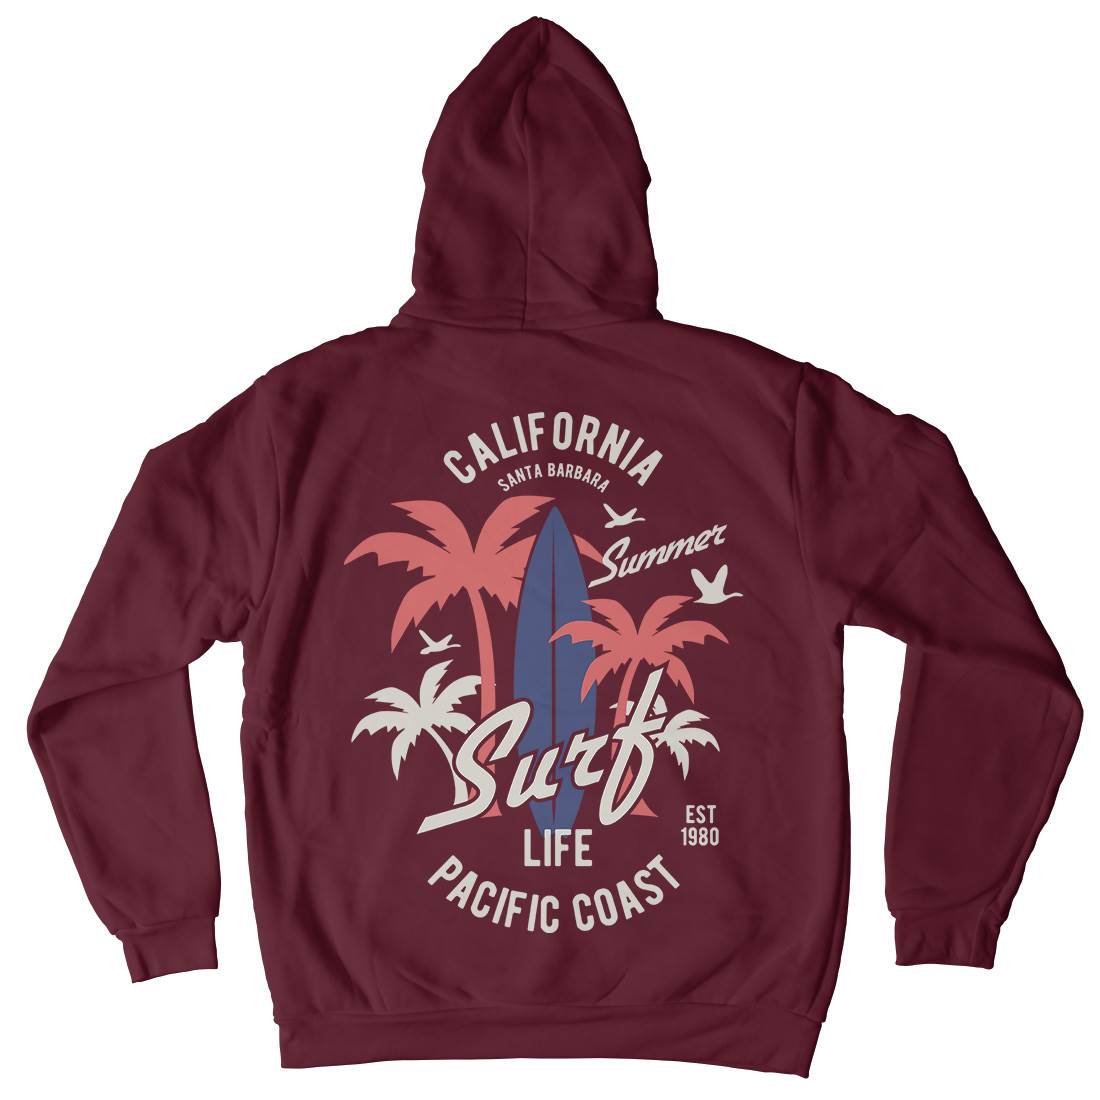 California Surfing Mens Hoodie With Pocket Surf B388